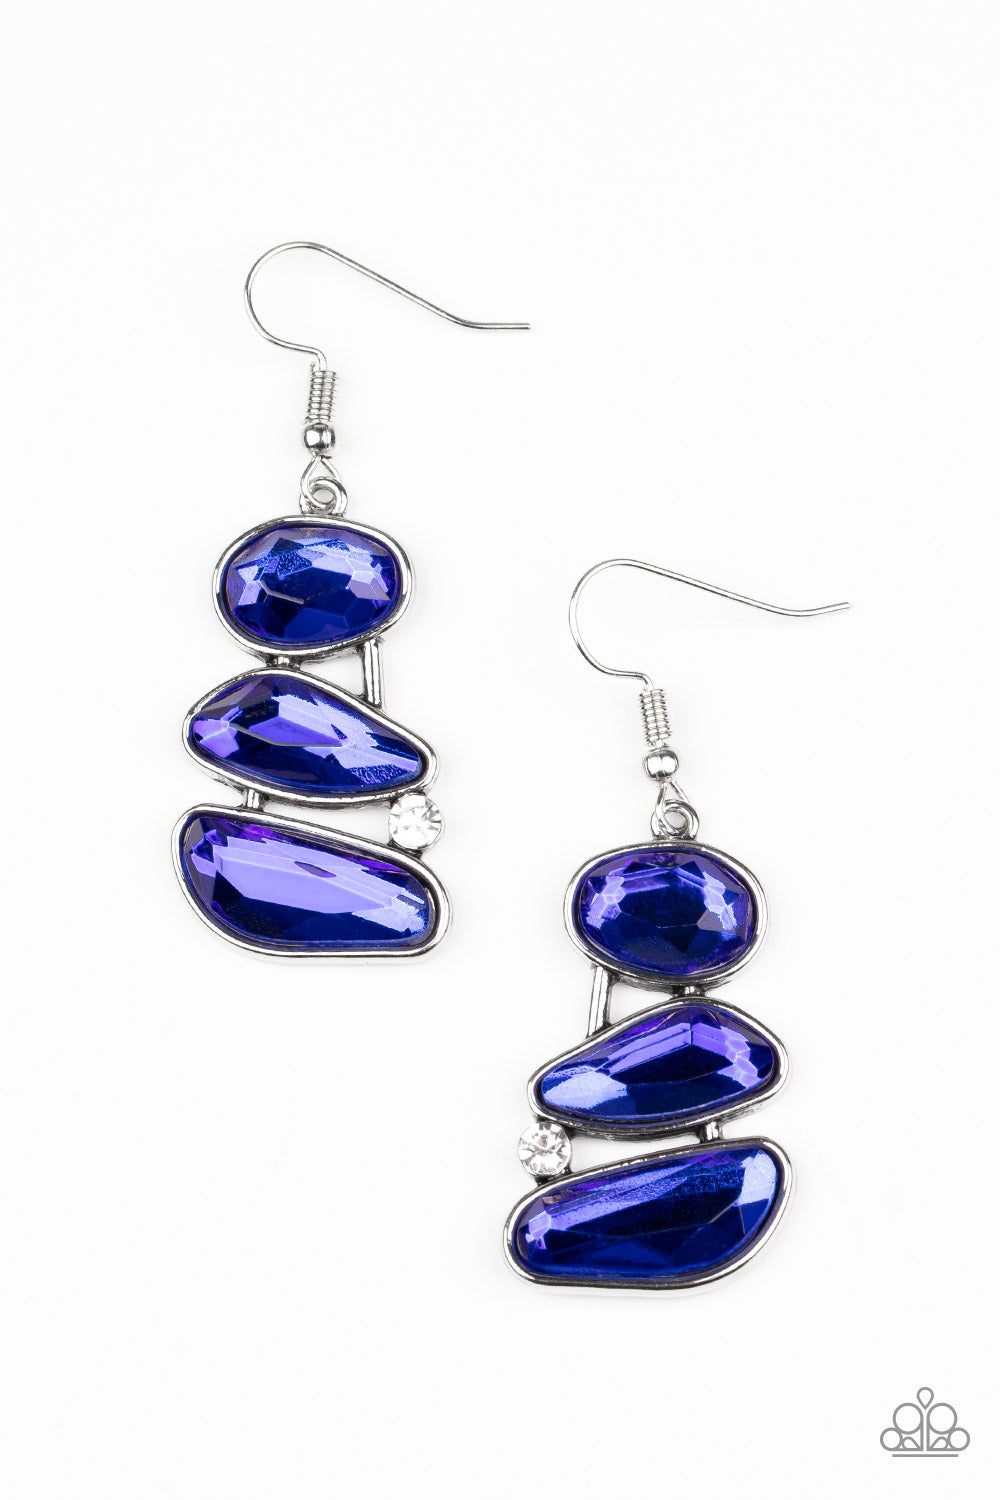 Gem Galaxy - Blue and Silver Earrings - Paparazzi Accessories - Infused with a solitaire white rhinestone, an asymmetrical series of glittery blue gems delicately stack into an out-of-this-world centerpiece. Earring attaches to a standard fishhook fitting. Sold as one pair of earrings.